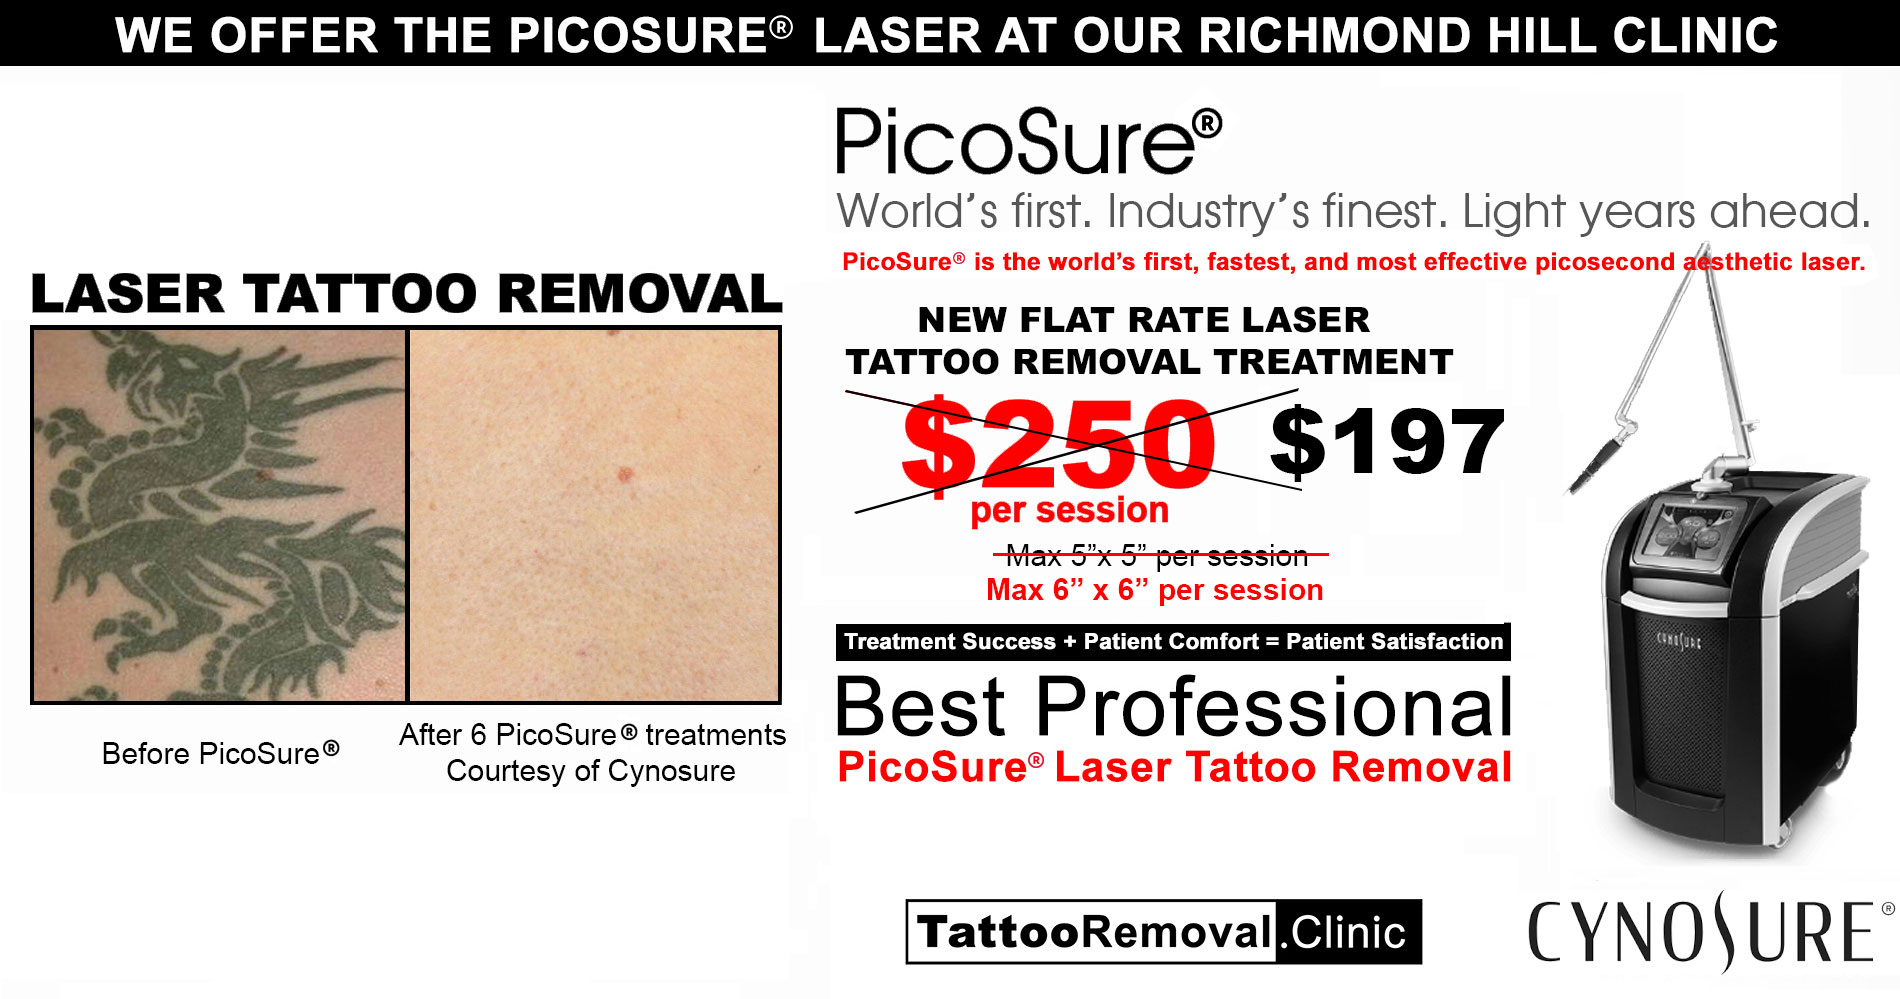 The Cost of Laser Tattoo Removal - PicoWay Vs Nanosecond